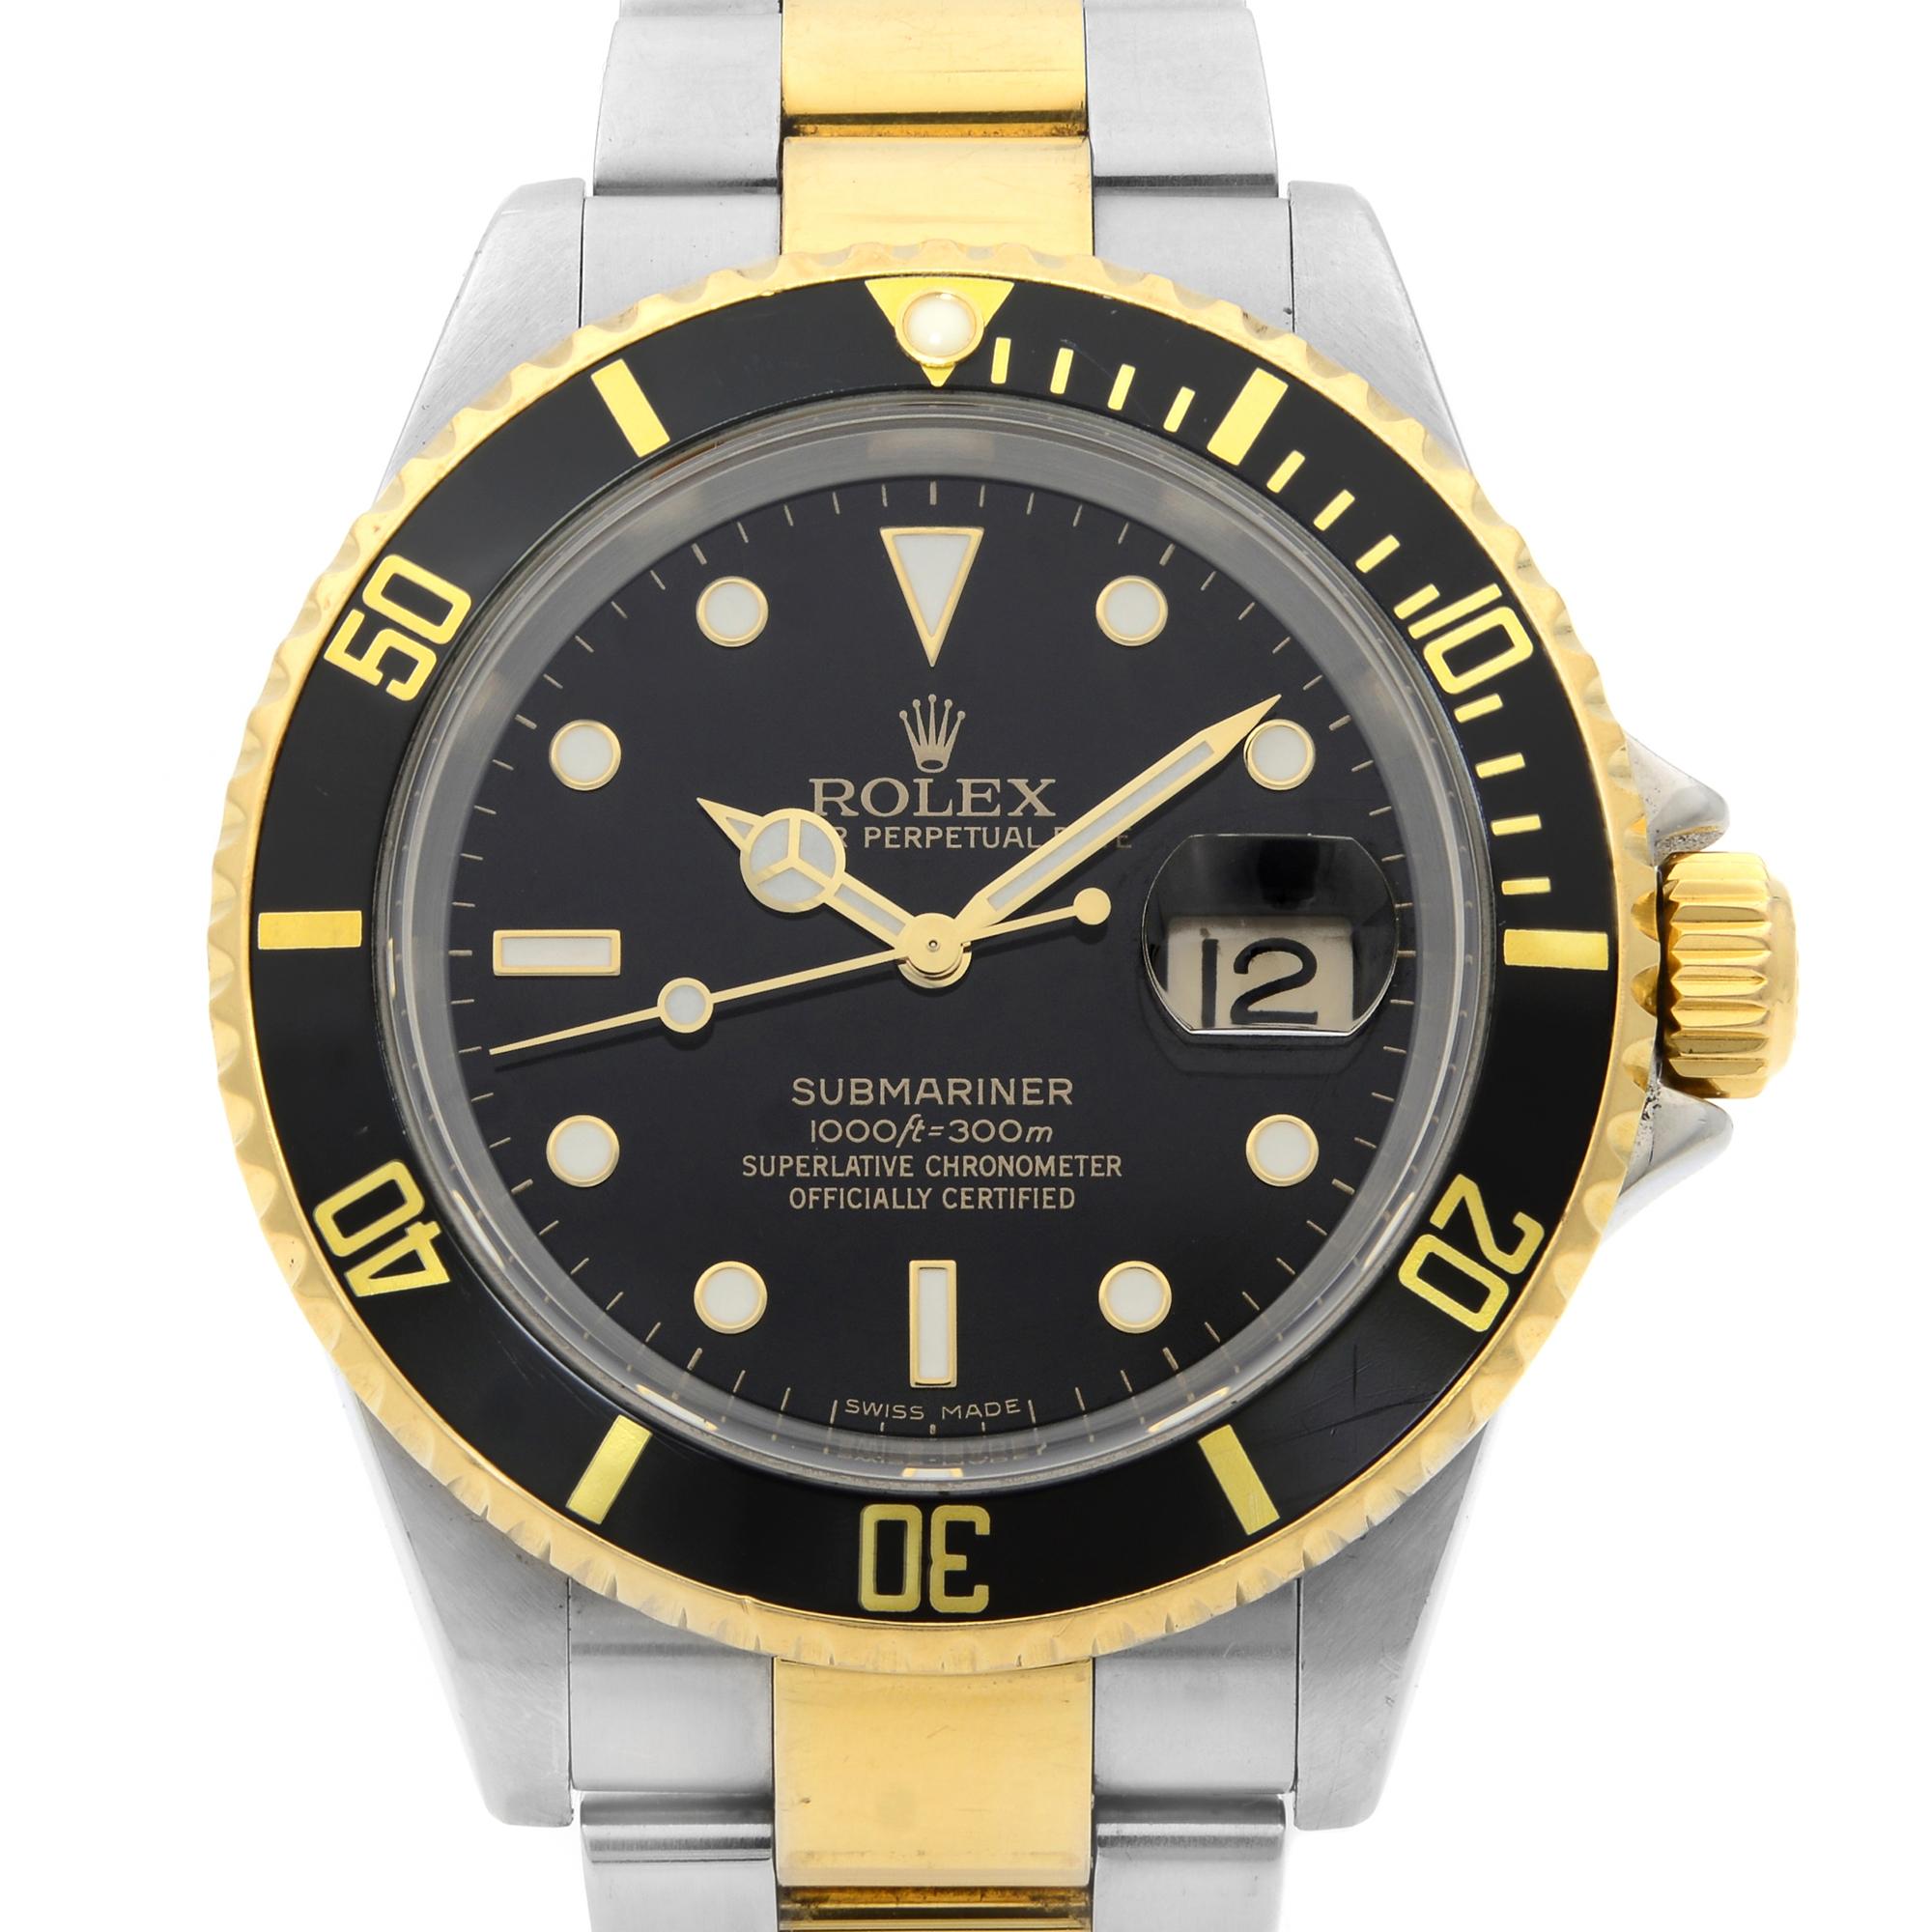 This pre-owned Rolex Submariner  16613T is a beautiful men's timepiece that is powered by mechanical (automatic) movement which is cased in a stainless steel case. It has a round shape face, date indicator dial and has hand sticks & dots style